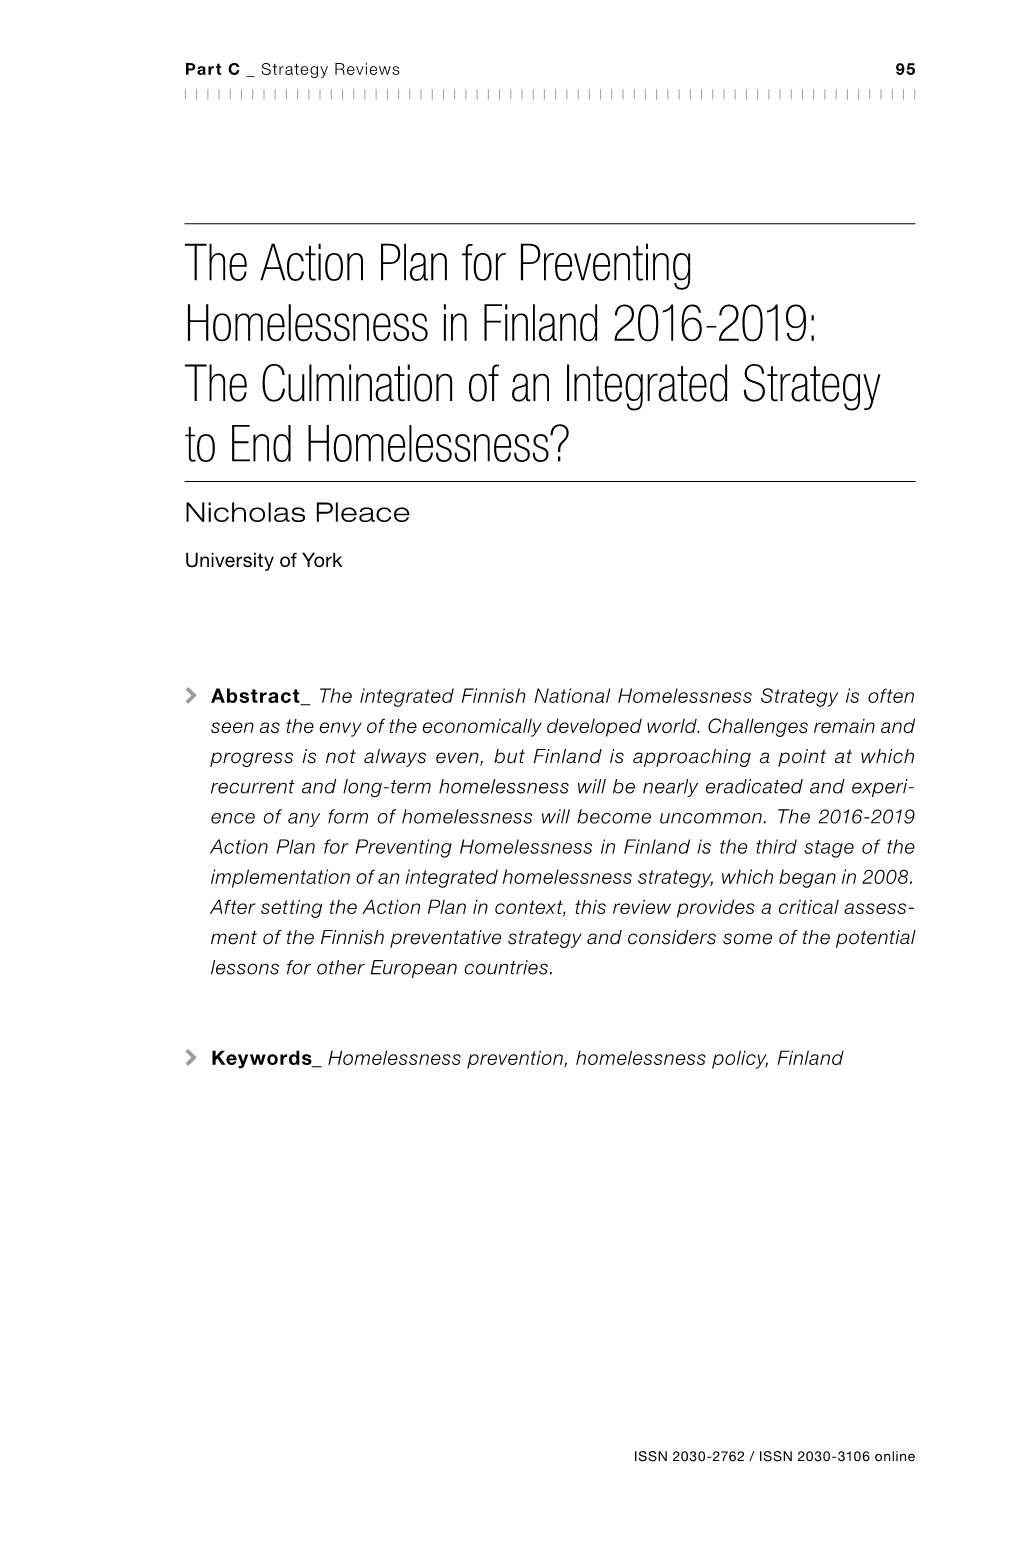 The Action Plan for Preventing Homelessness in Finland 2016-2019: the Culmination of an Integrated Strategy to End Homelessness? Nicholas Pleace